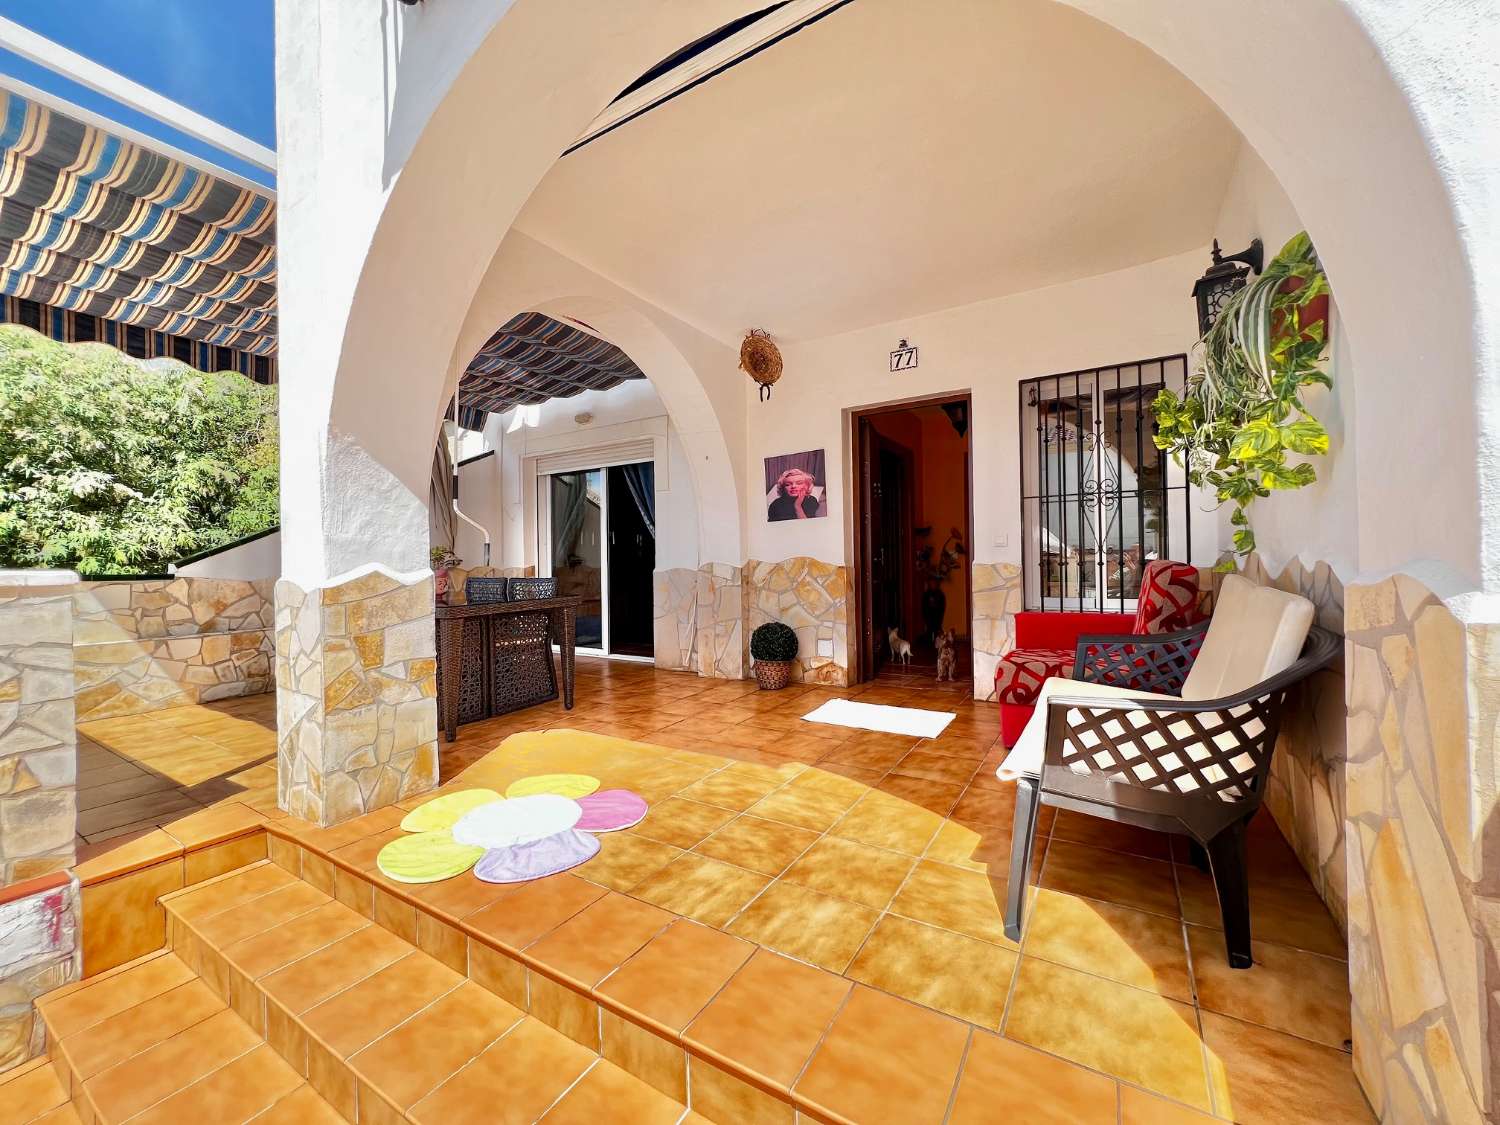 Spectacular semi-detached house in Nerja